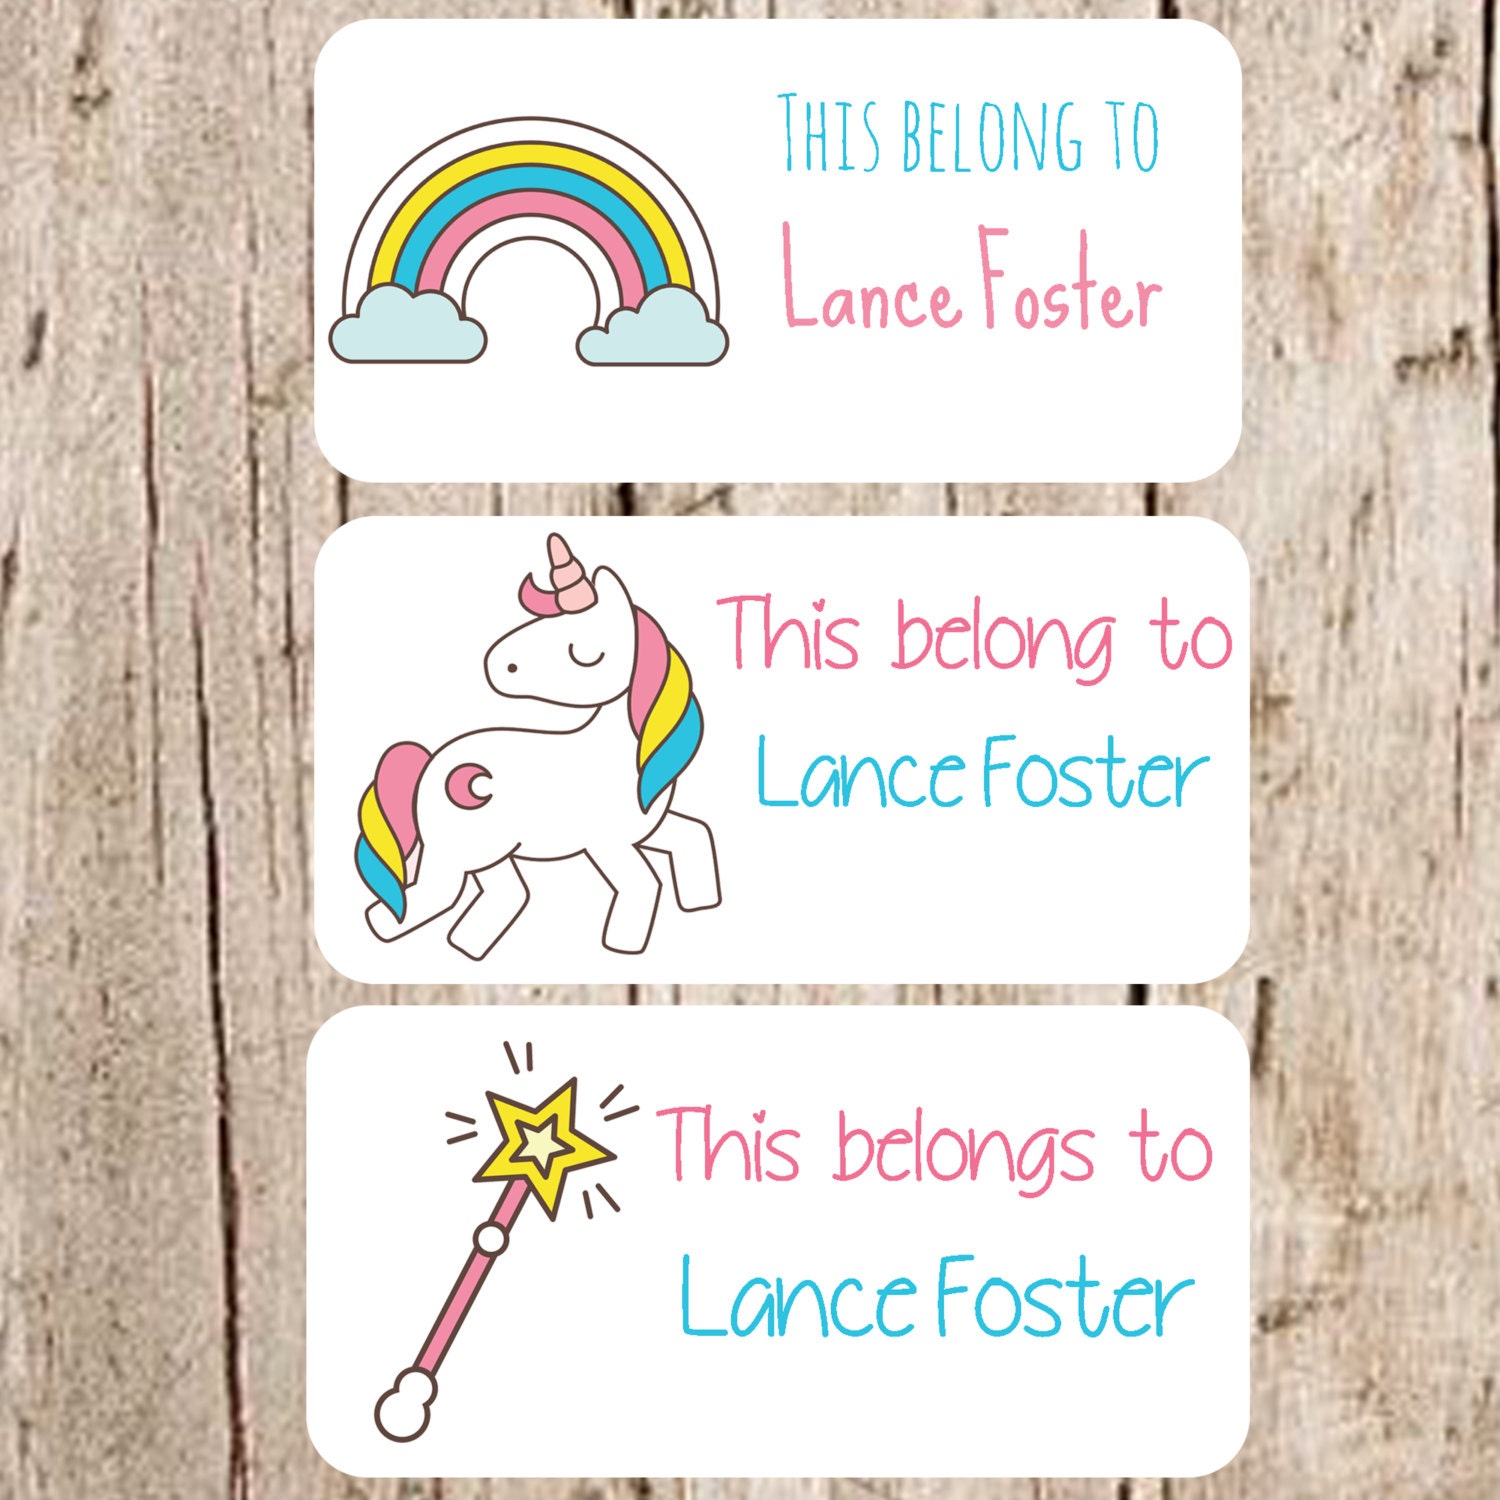 Unicorn Name Labels, Personalized Waterproof Stickers, Daycare Labels,  School Supply Labels, Custom Name Labels for Kids, Rainbow Labels 